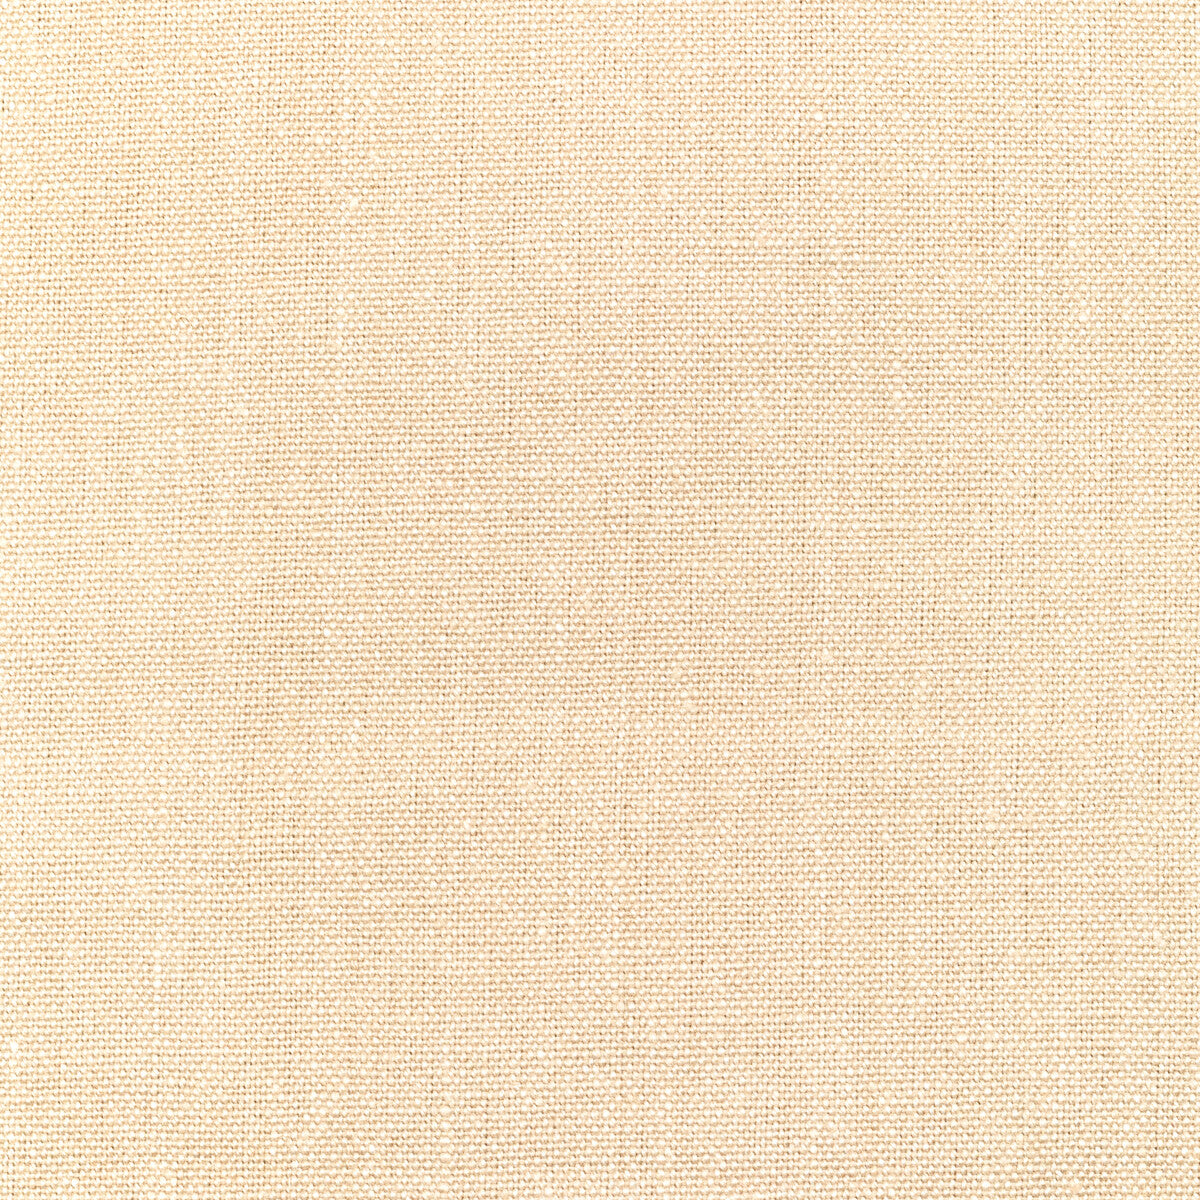 Watermill Linen fabric in natural color - pattern 2012176.111.0 - by Lee Jofa in the Colour Complements II collection